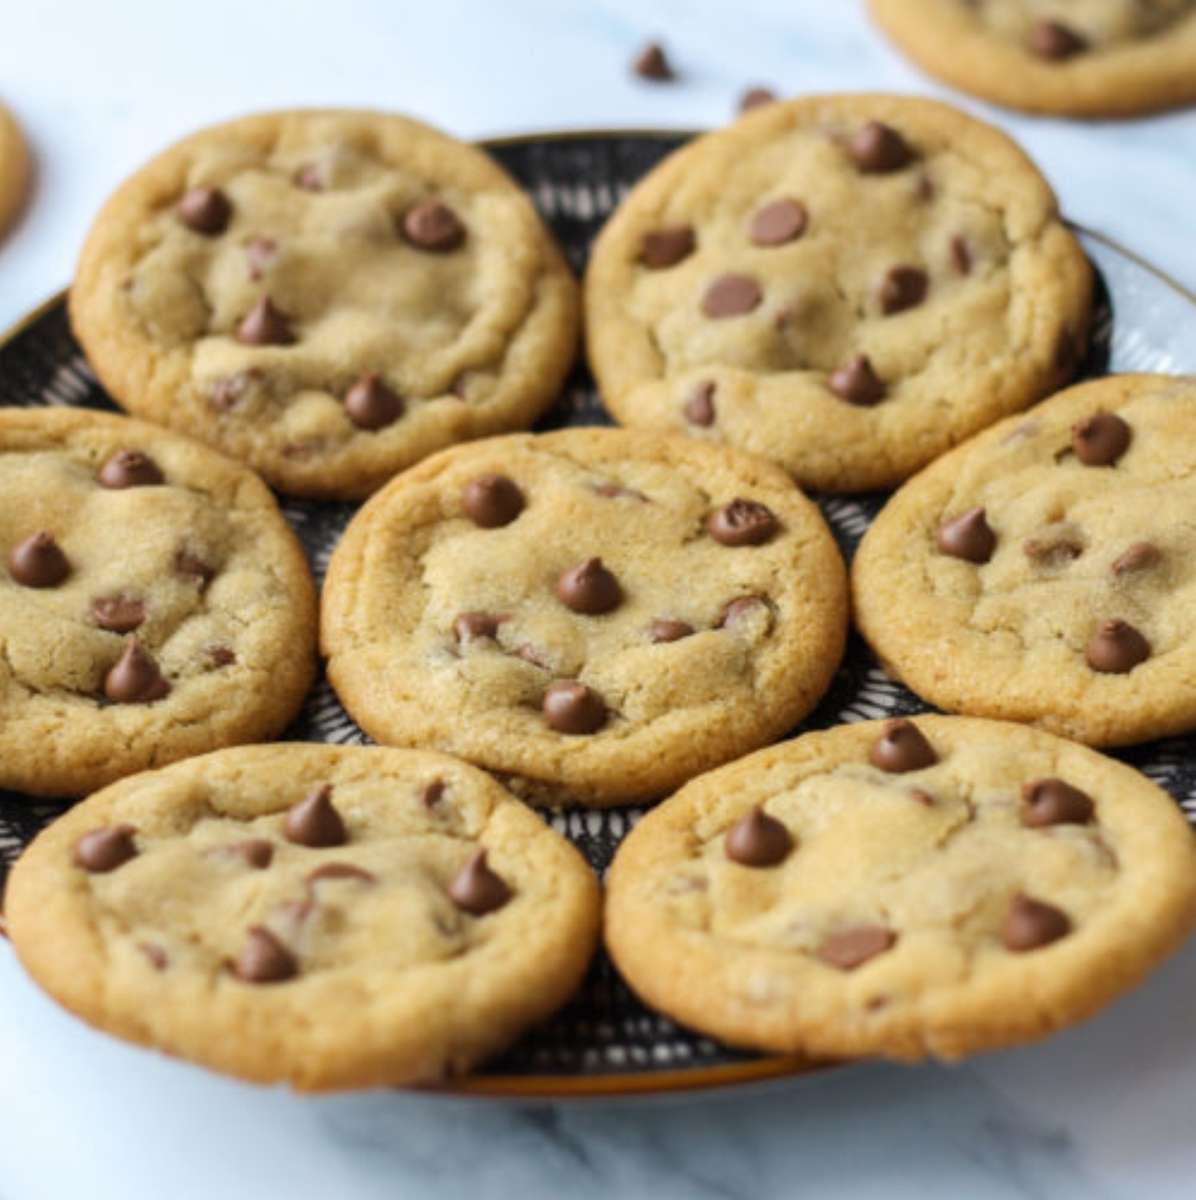 Chewy Chocolate Chip Cookies❤️❤️❤️❤️ Pussel online